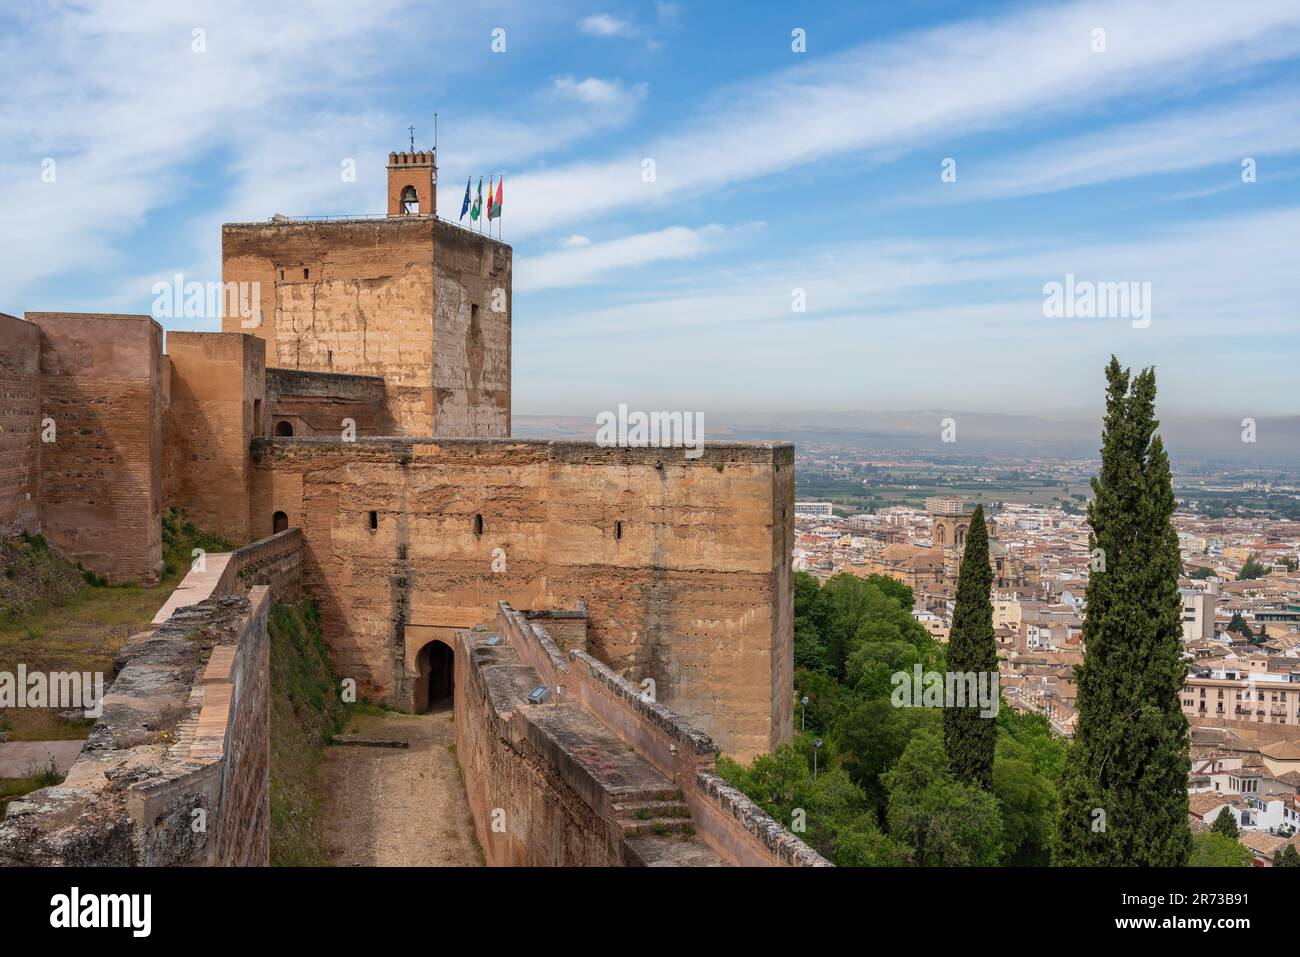 Watch Tower (Torre de la Vela) and Tower of arms (Torre de las Armas) at Alcazaba area of Alhambra fortress - Granada, Andalusia, Spain Stock Photo